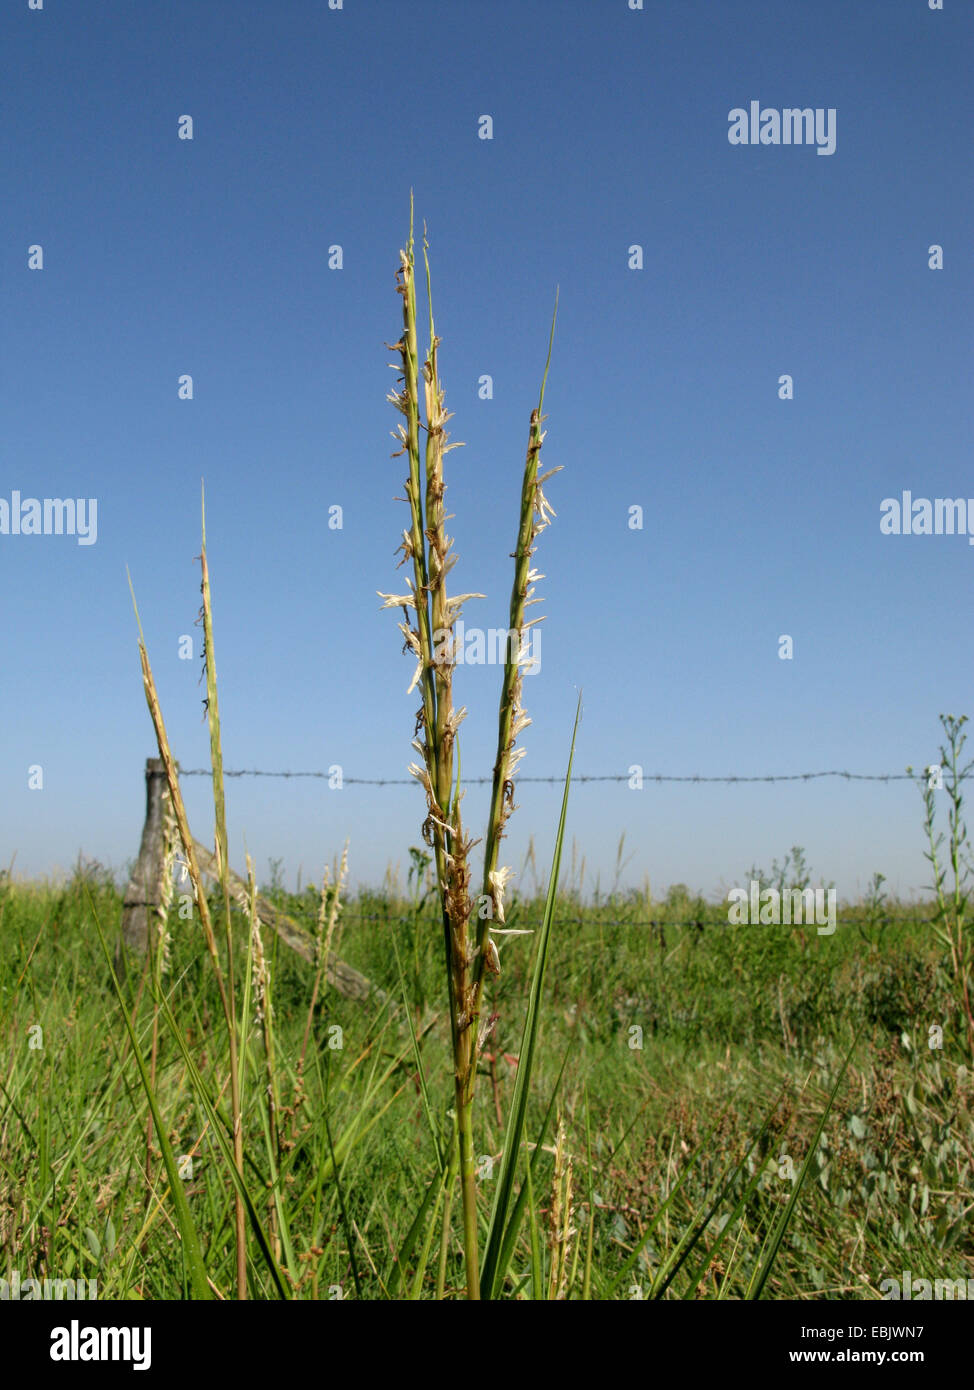 Common Cordgrass (Spartina anglica), blooming in a salt marsh, Germany, Baltrum, Lower Saxony Wadden Sea National Park Stock Photo